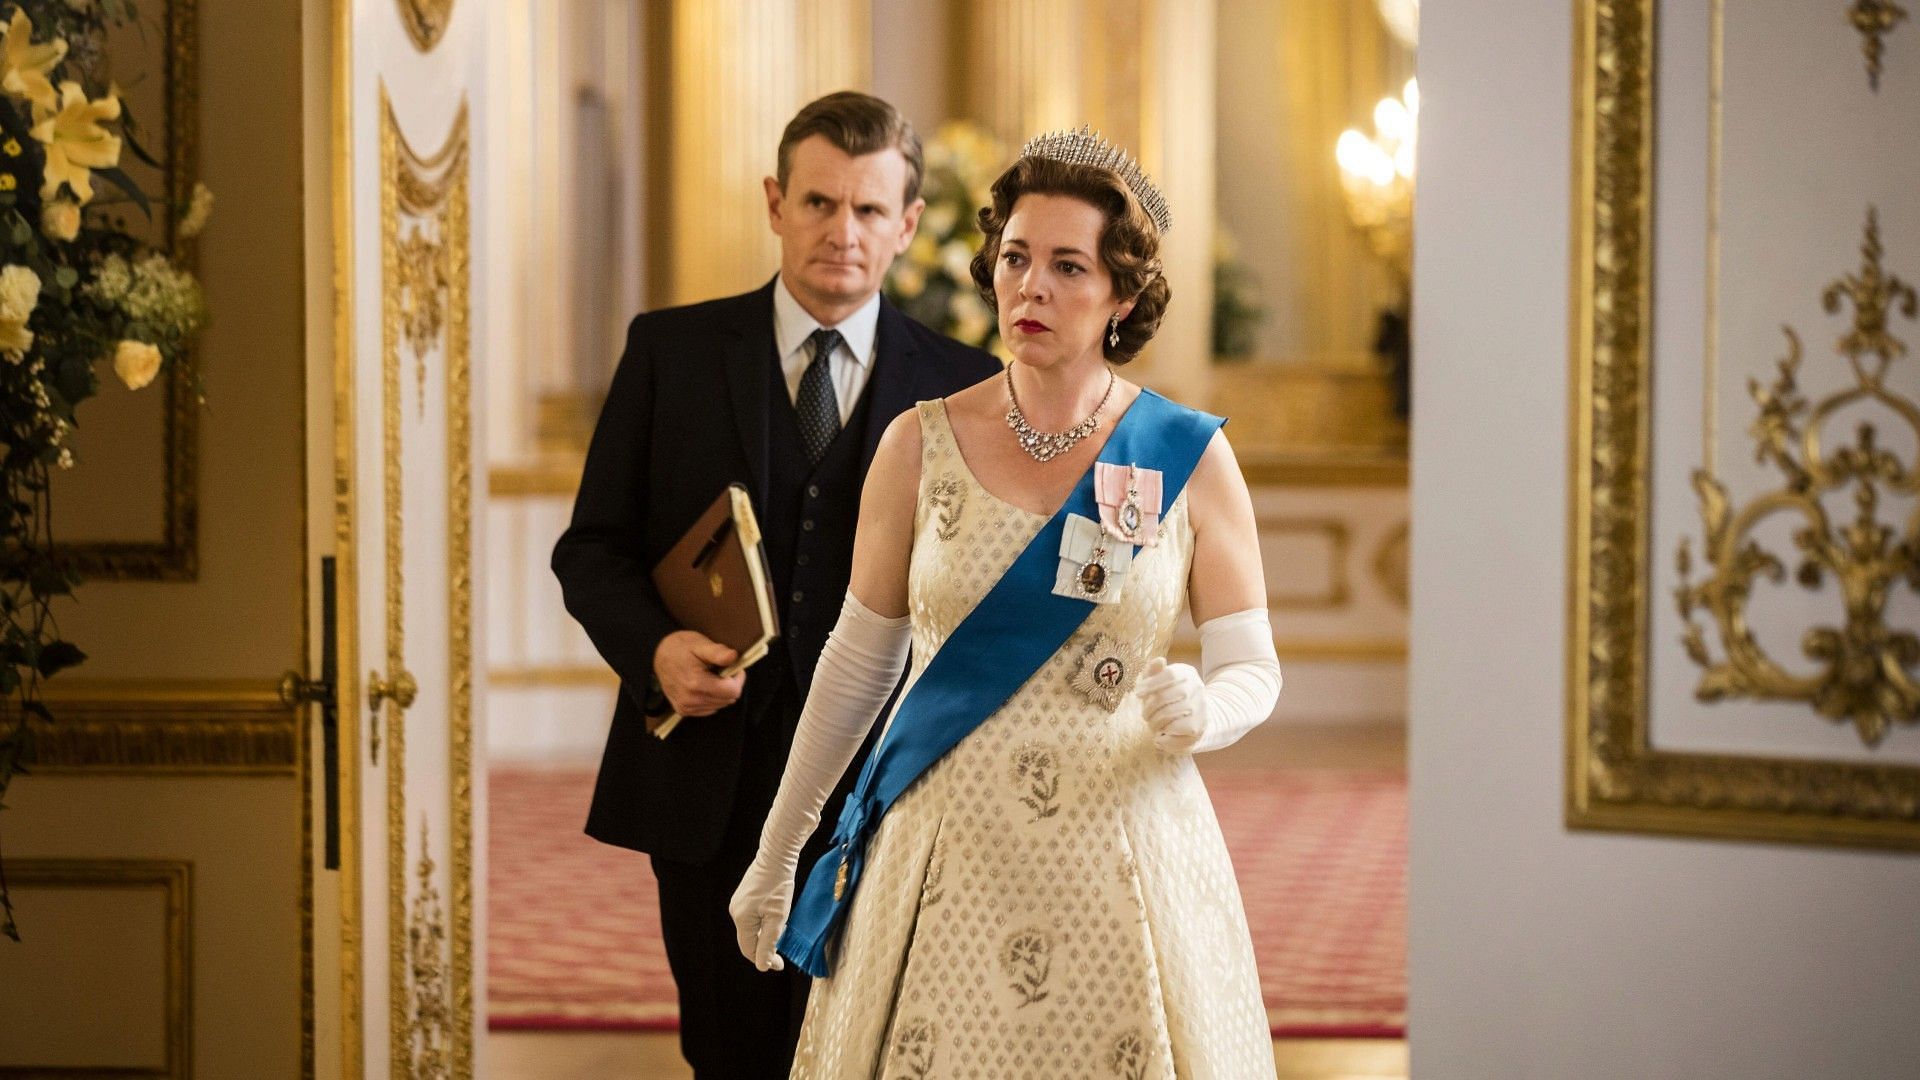 A still from The Crown (Image via Netflix)